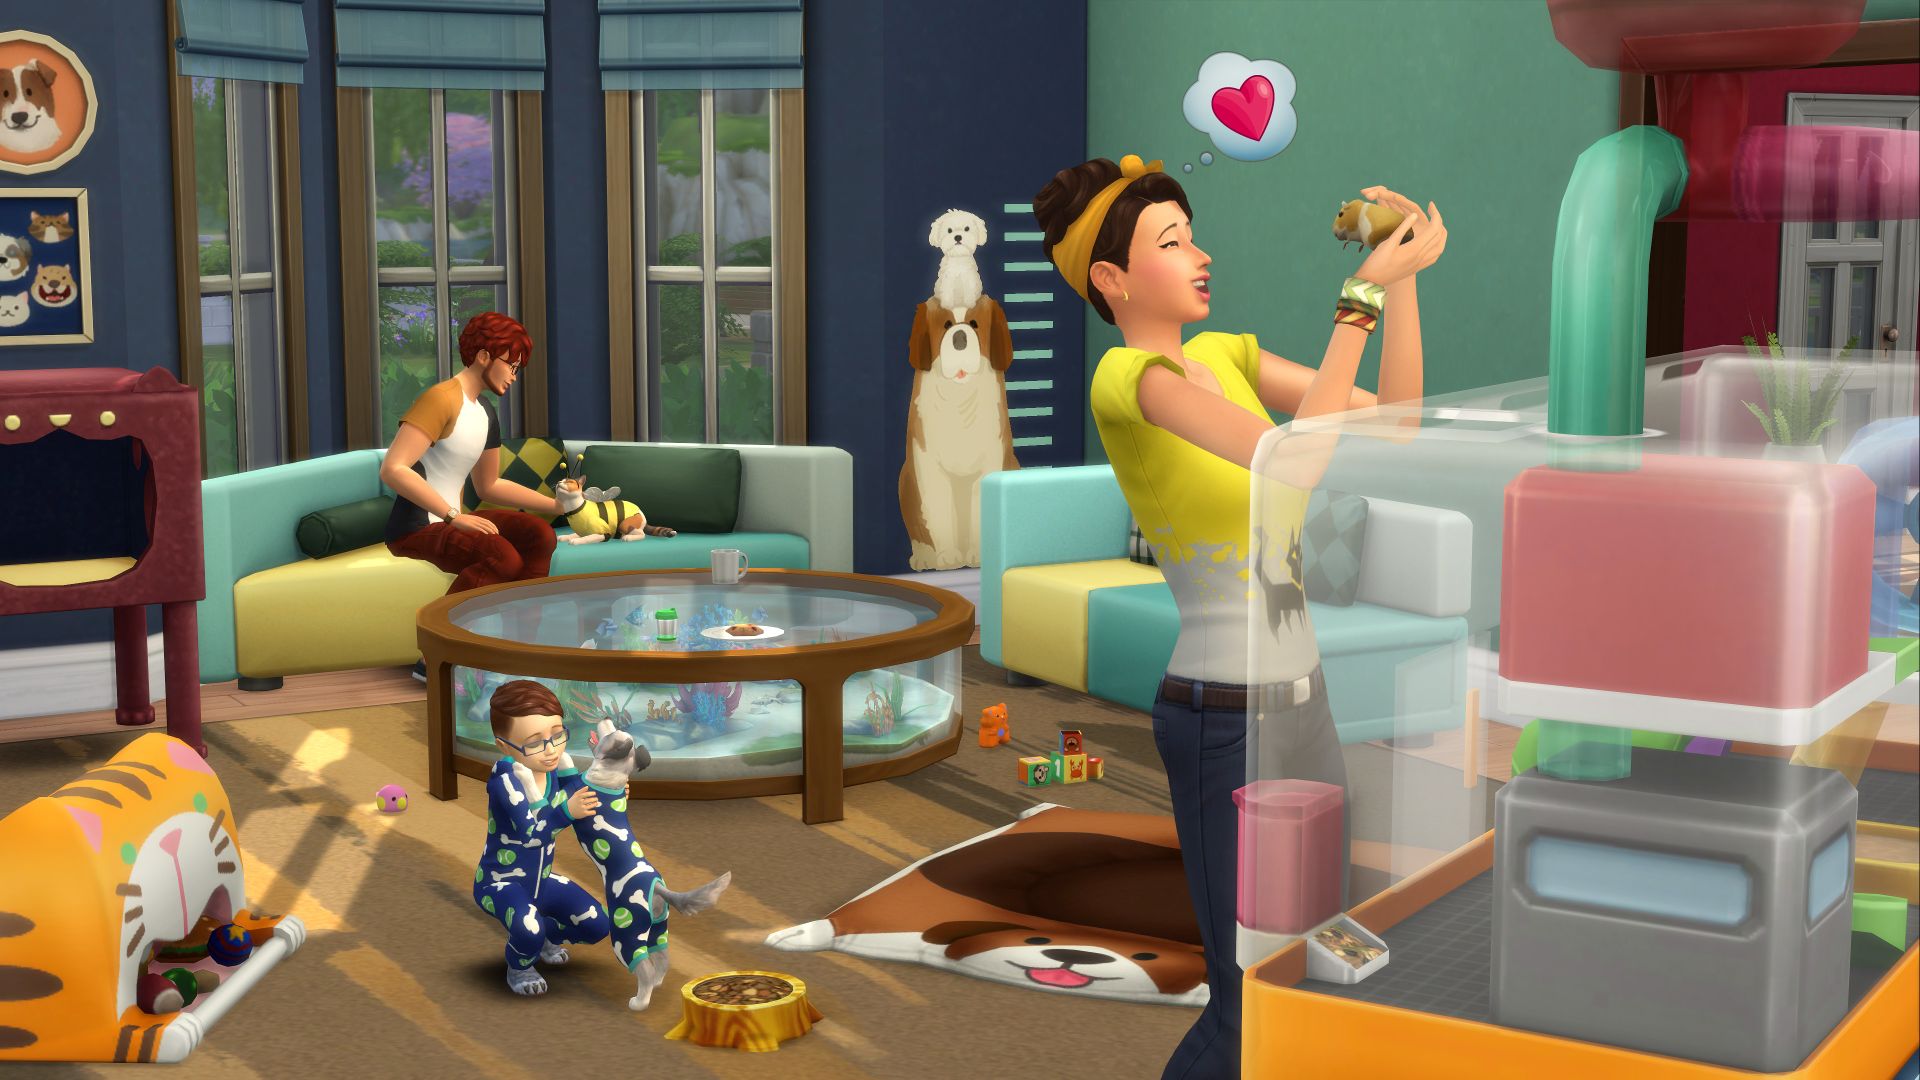 use the sims 4 pets expansion pack